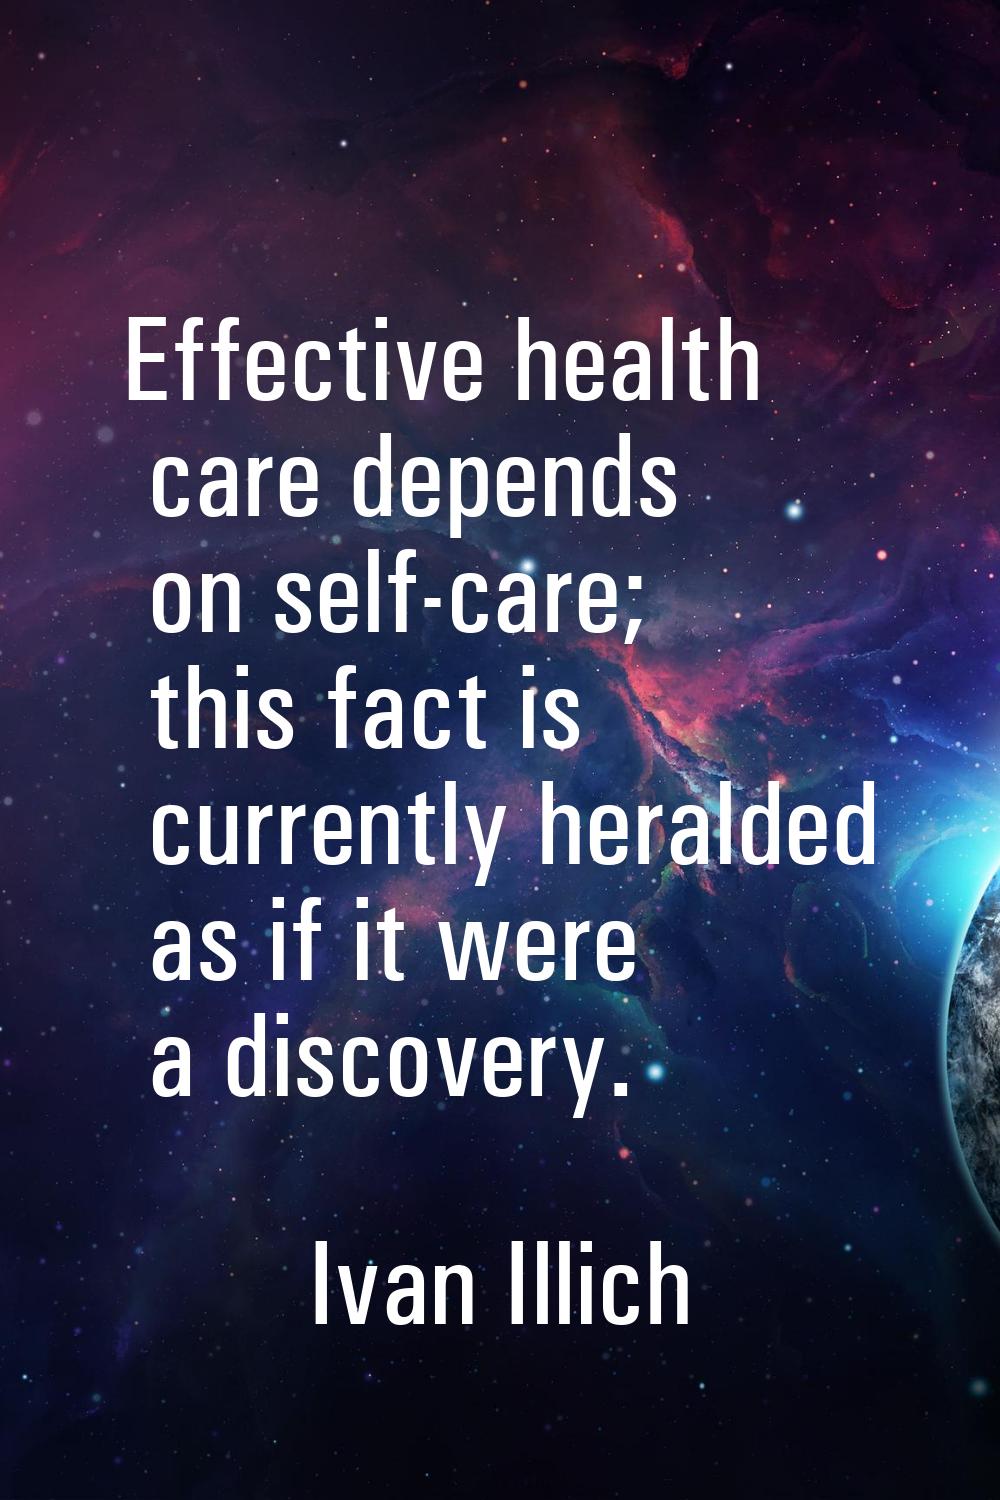 Effective health care depends on self-care; this fact is currently heralded as if it were a discove